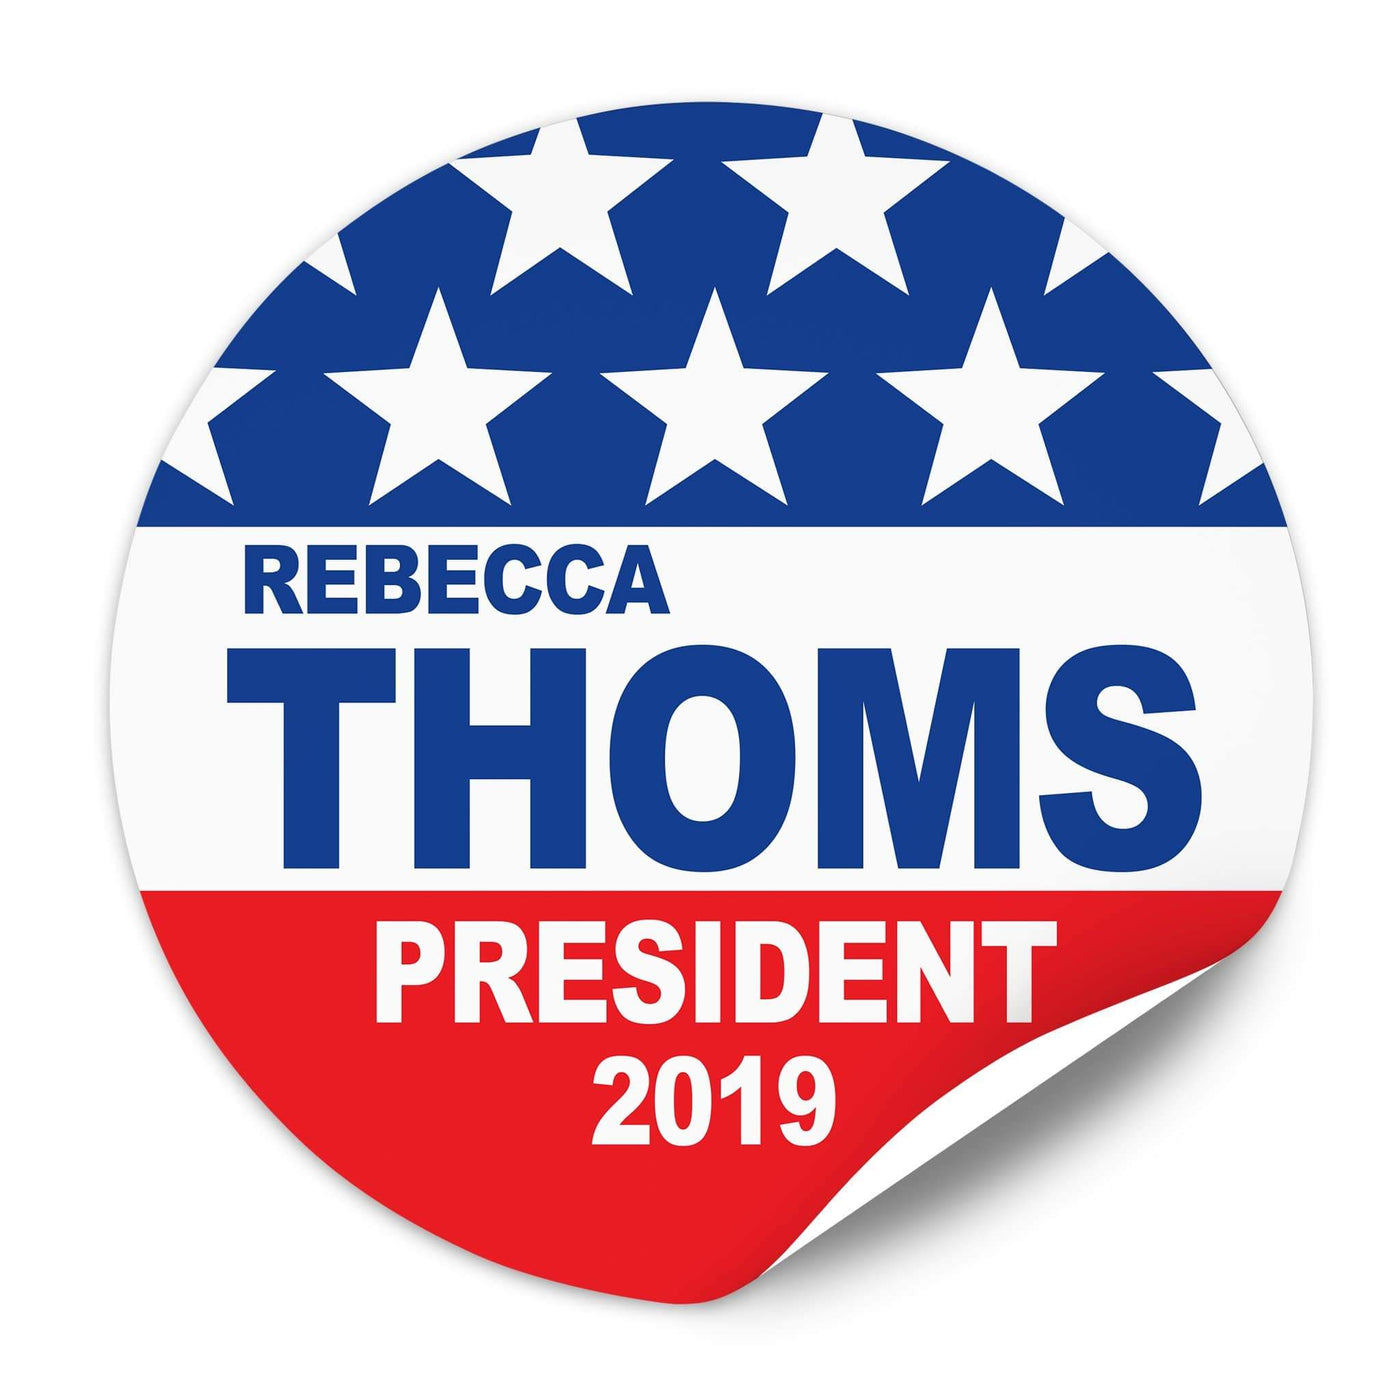 Political Campaign Sticker Template - PCS-101, paper with adhesive back, stars, red white and blue